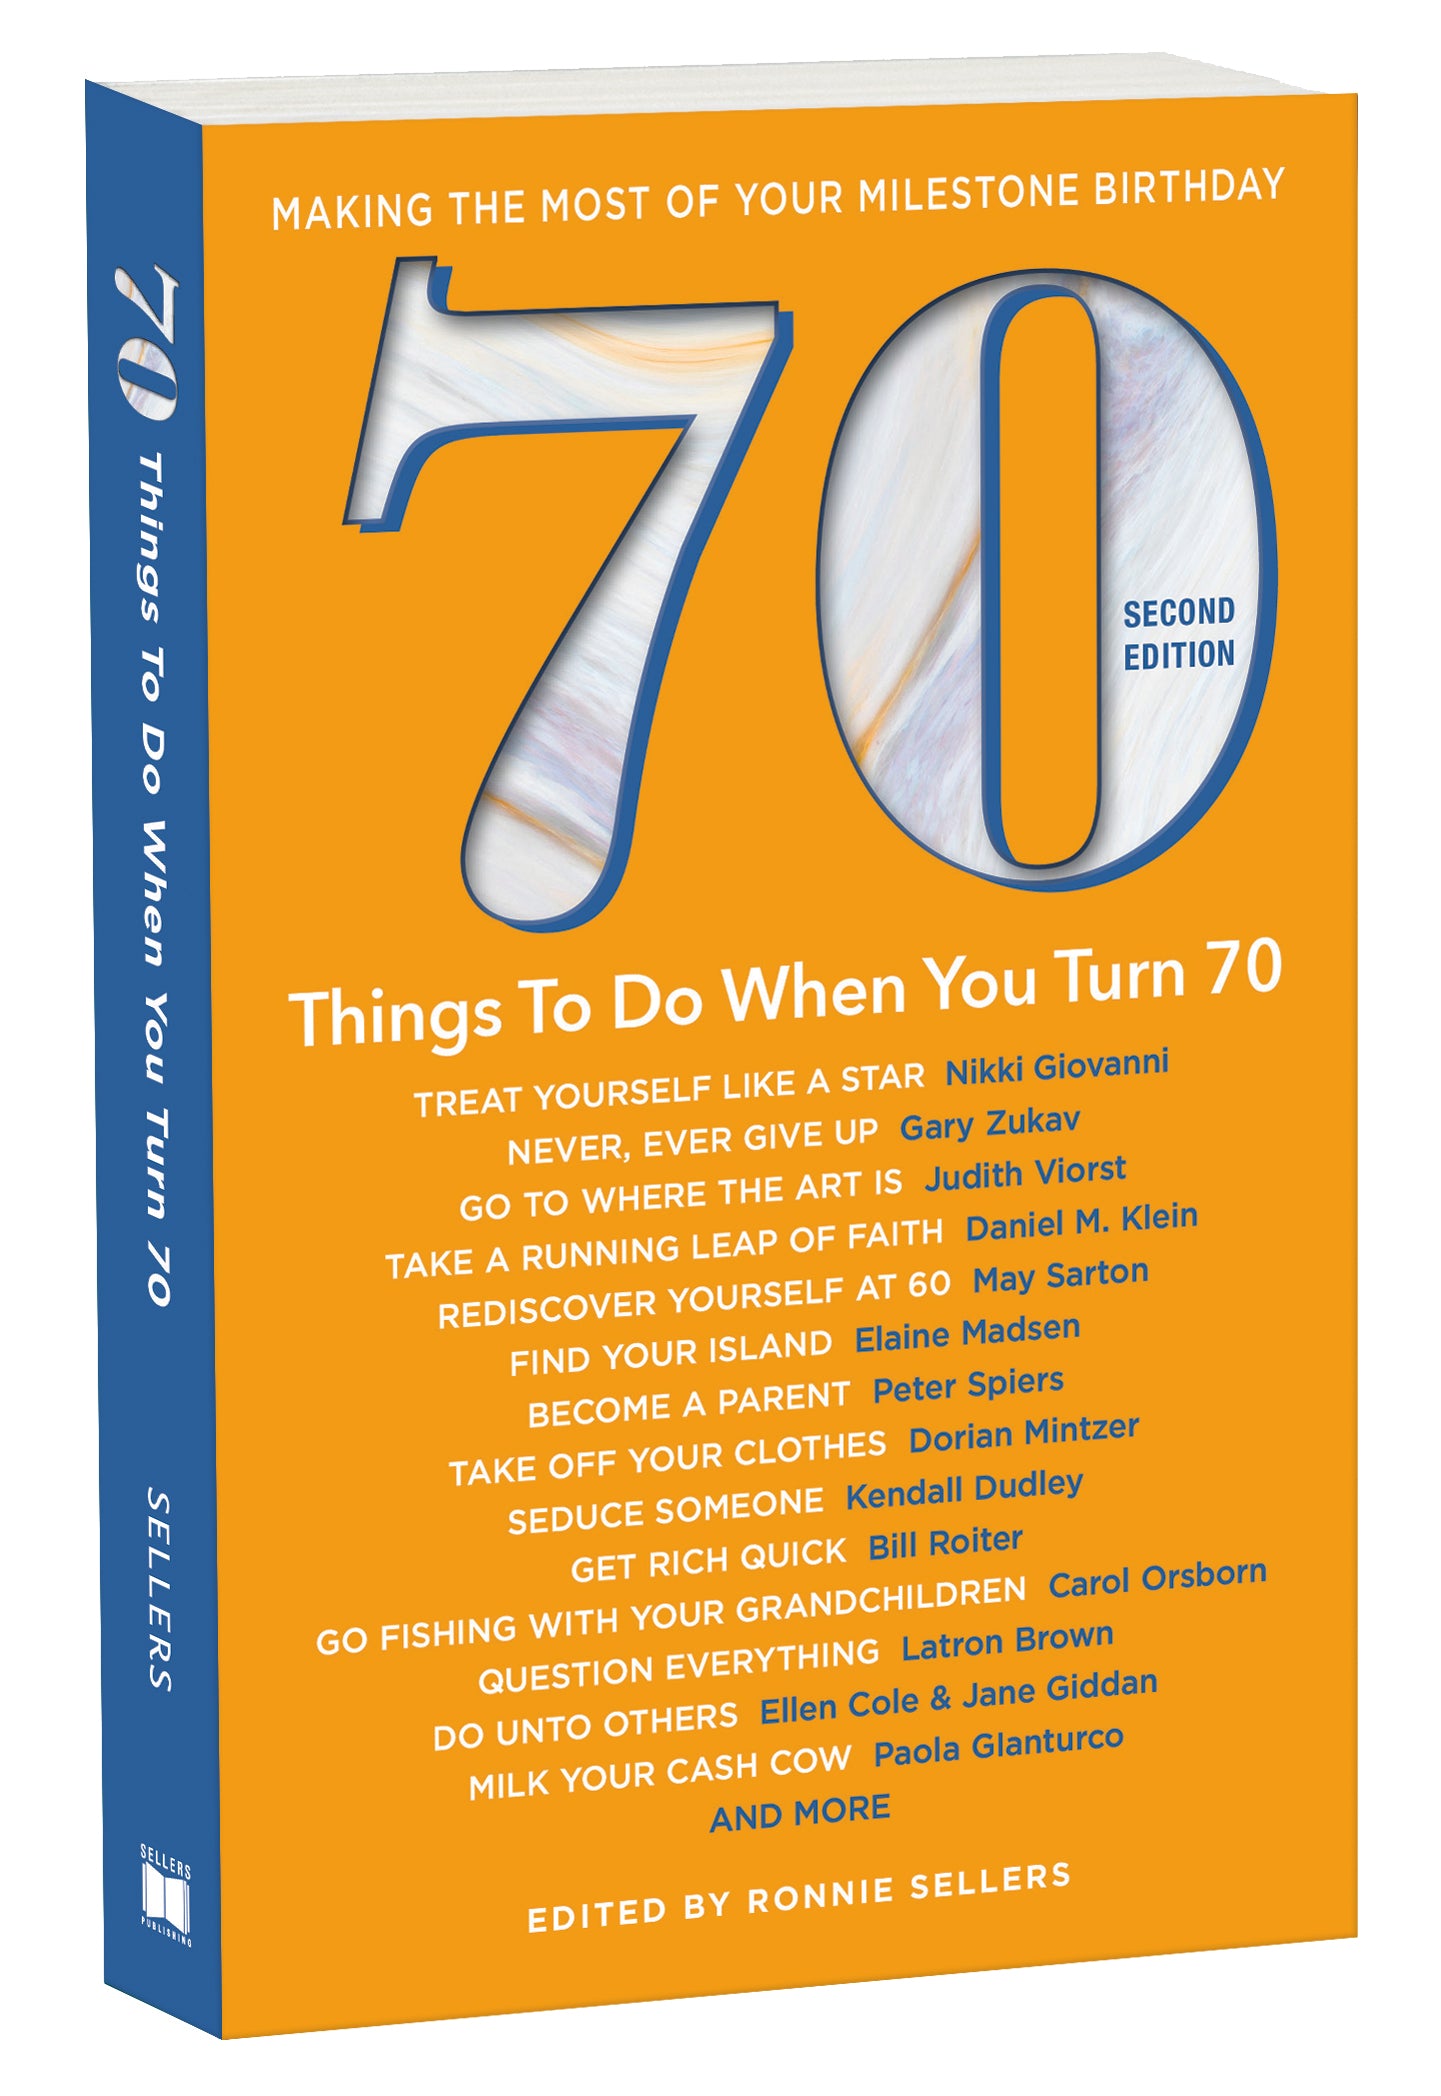 70 Things To Do When You Turn 70 - Making The Most Of Your Milestone Birthday Gift Book Cover